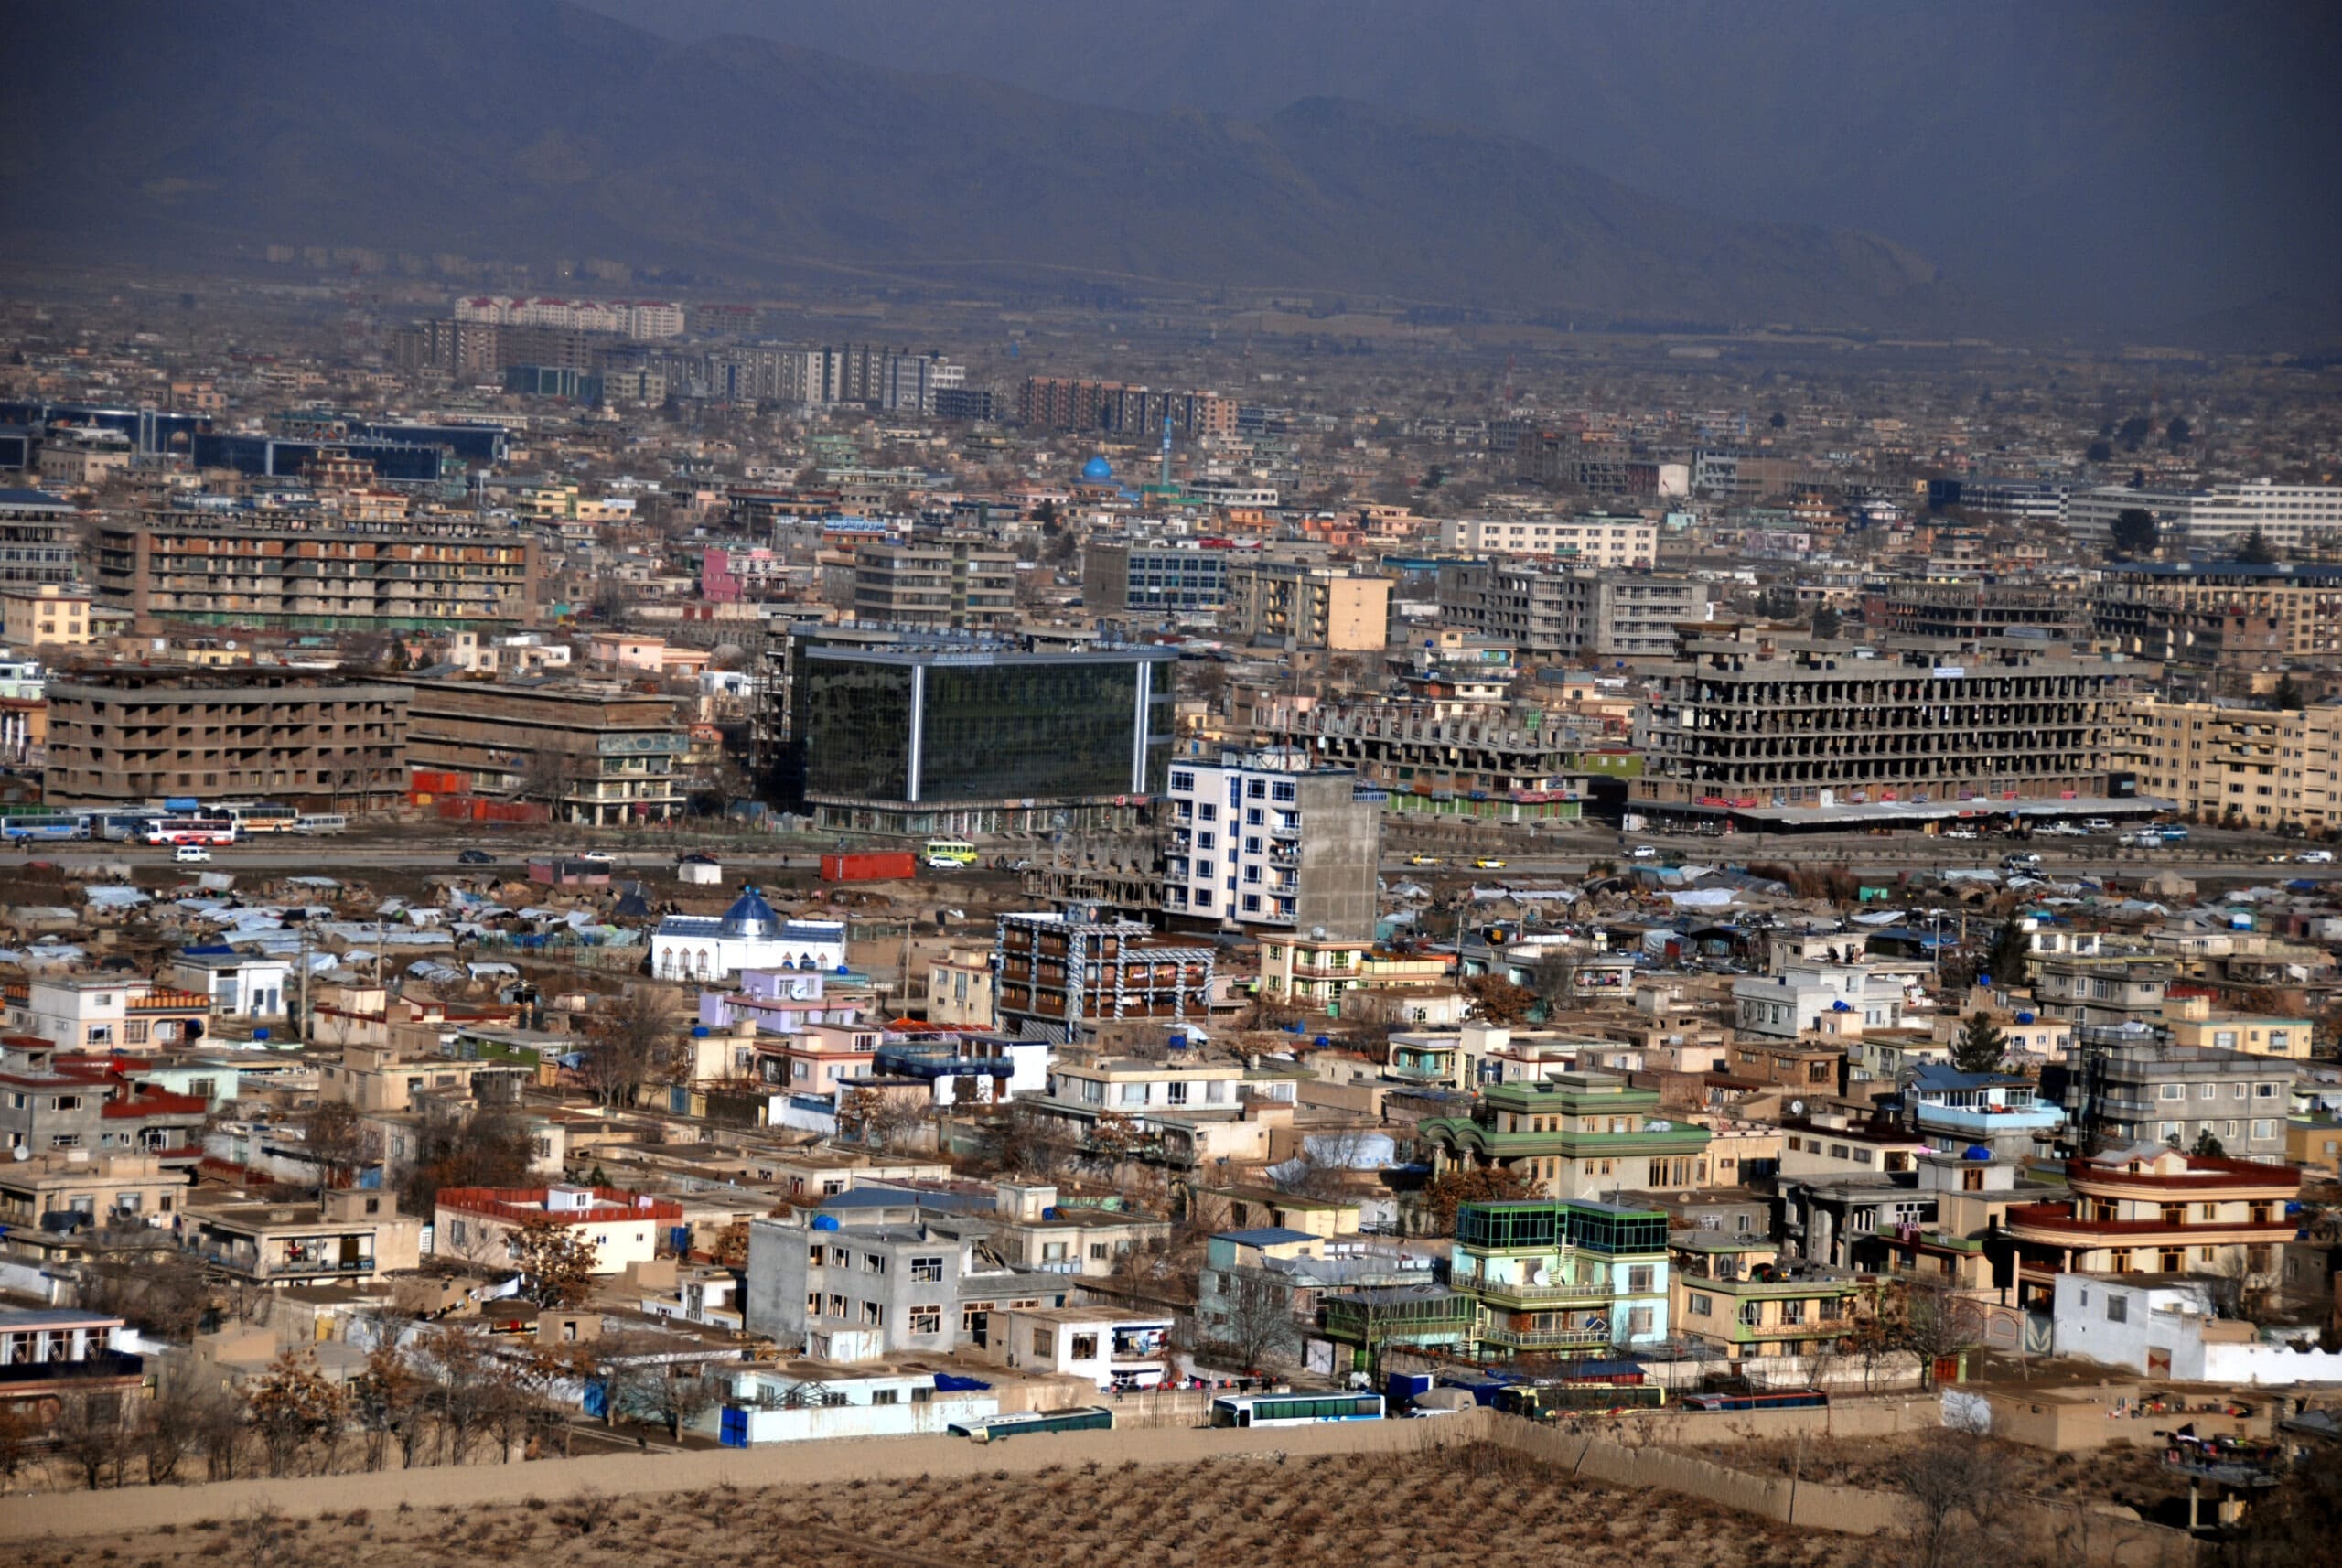 View of the center of Kabul, the capital of Afghanistan in 2009. Photo: Taken 5 February 2009 by Olgamielnikiewicz. (CC BY-SA 4.0).